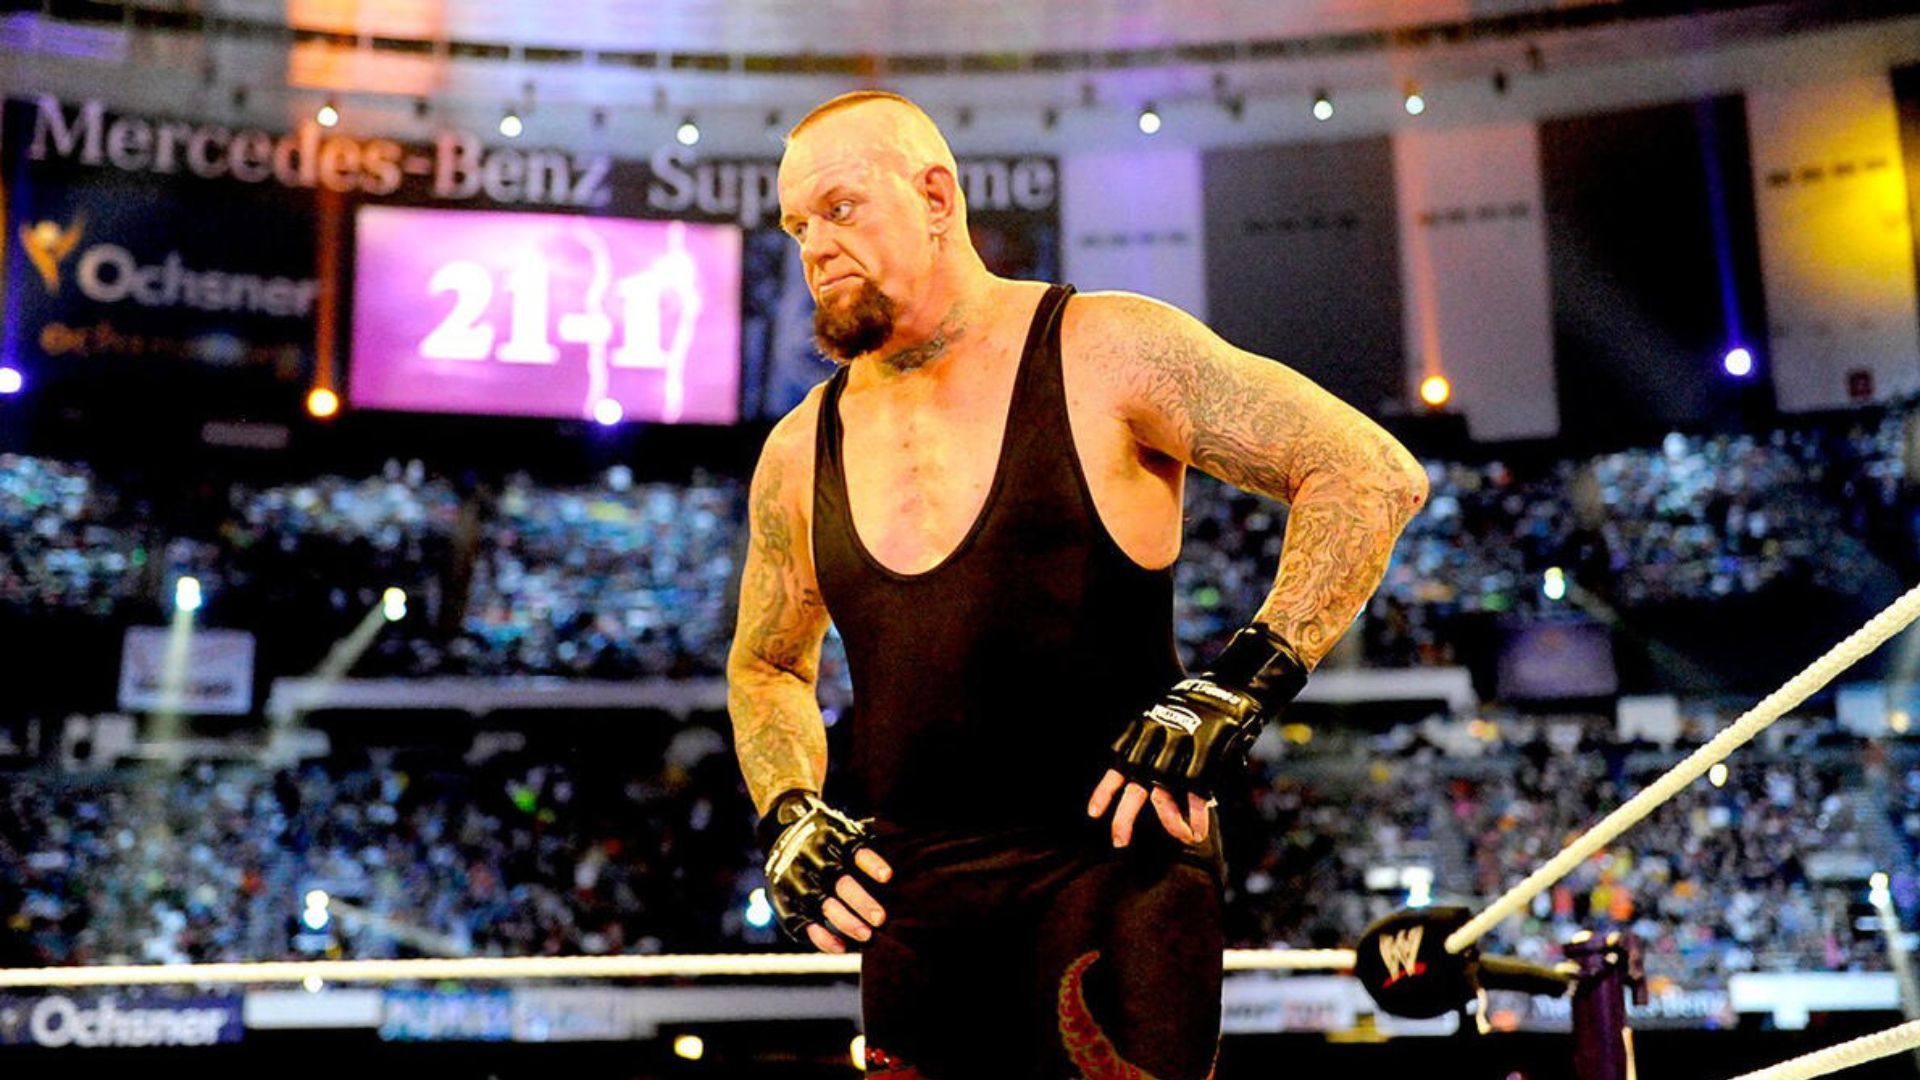 The Undertaker after losing to Brock Lesnar at WrestleMania 30! [Image credit&quot; WWE.com]